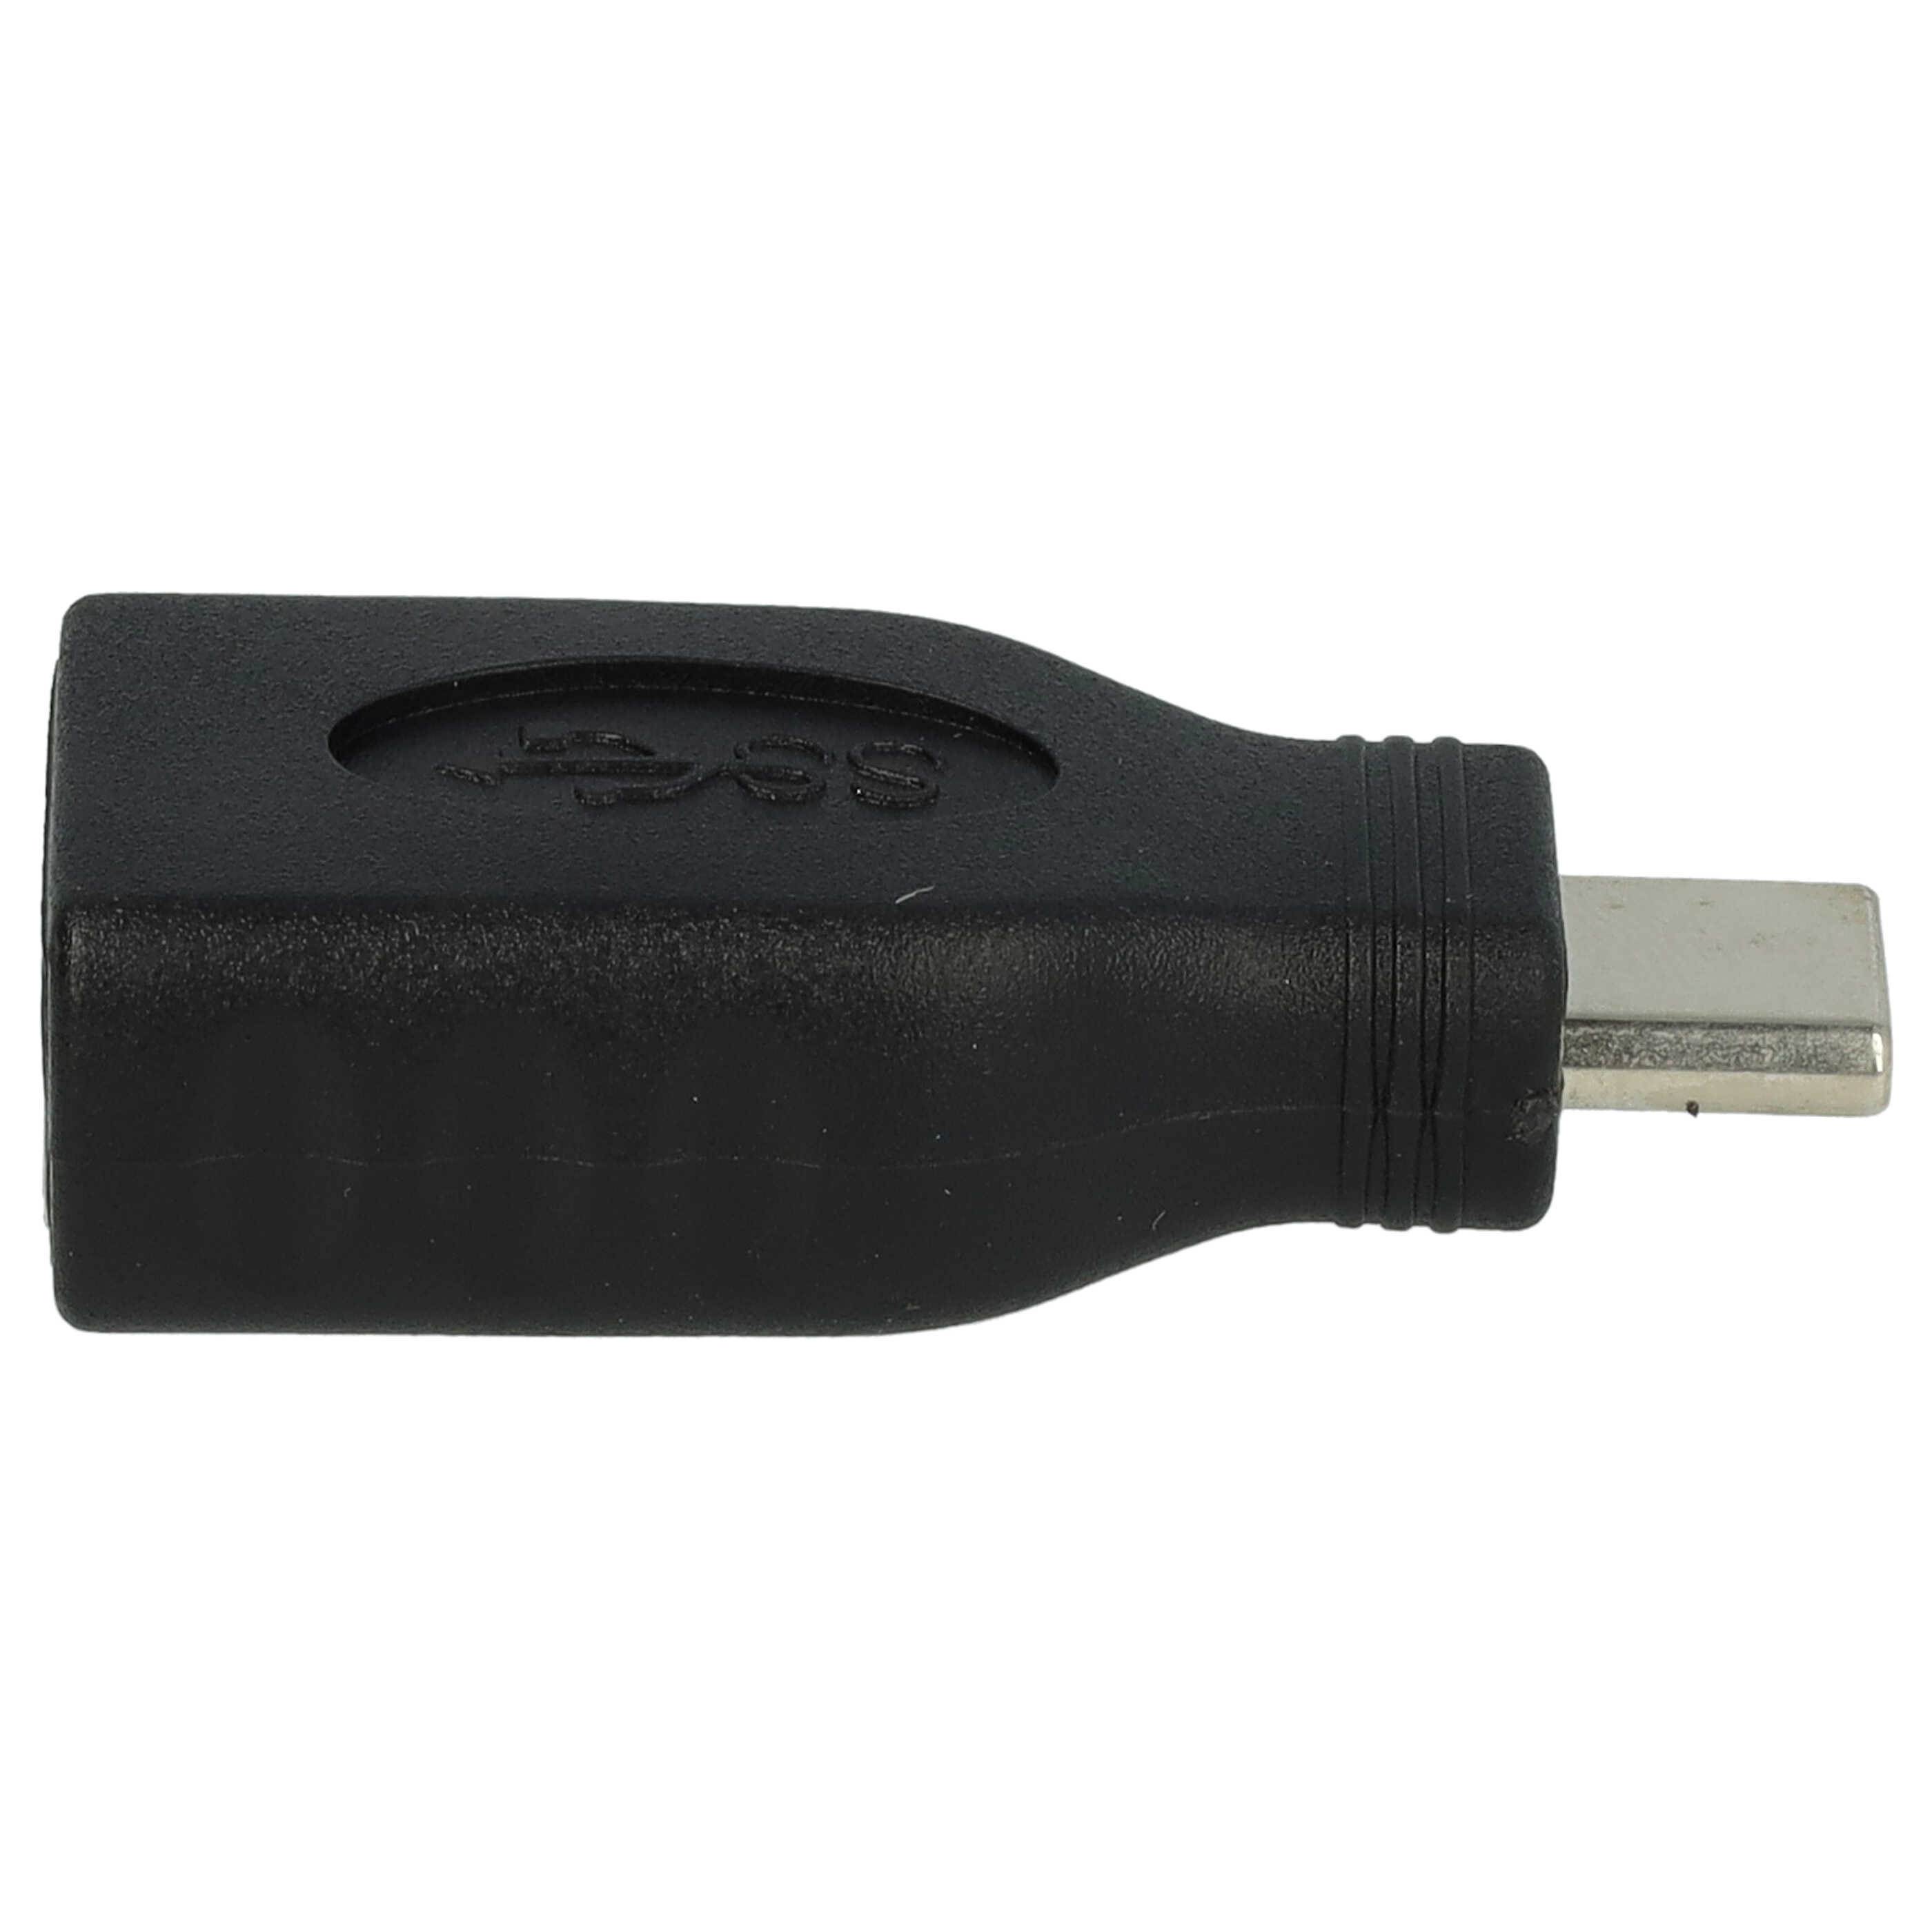 Adapter USB Type C to USB 3.0 suitable for P9 Huawei - USB Adapter Black